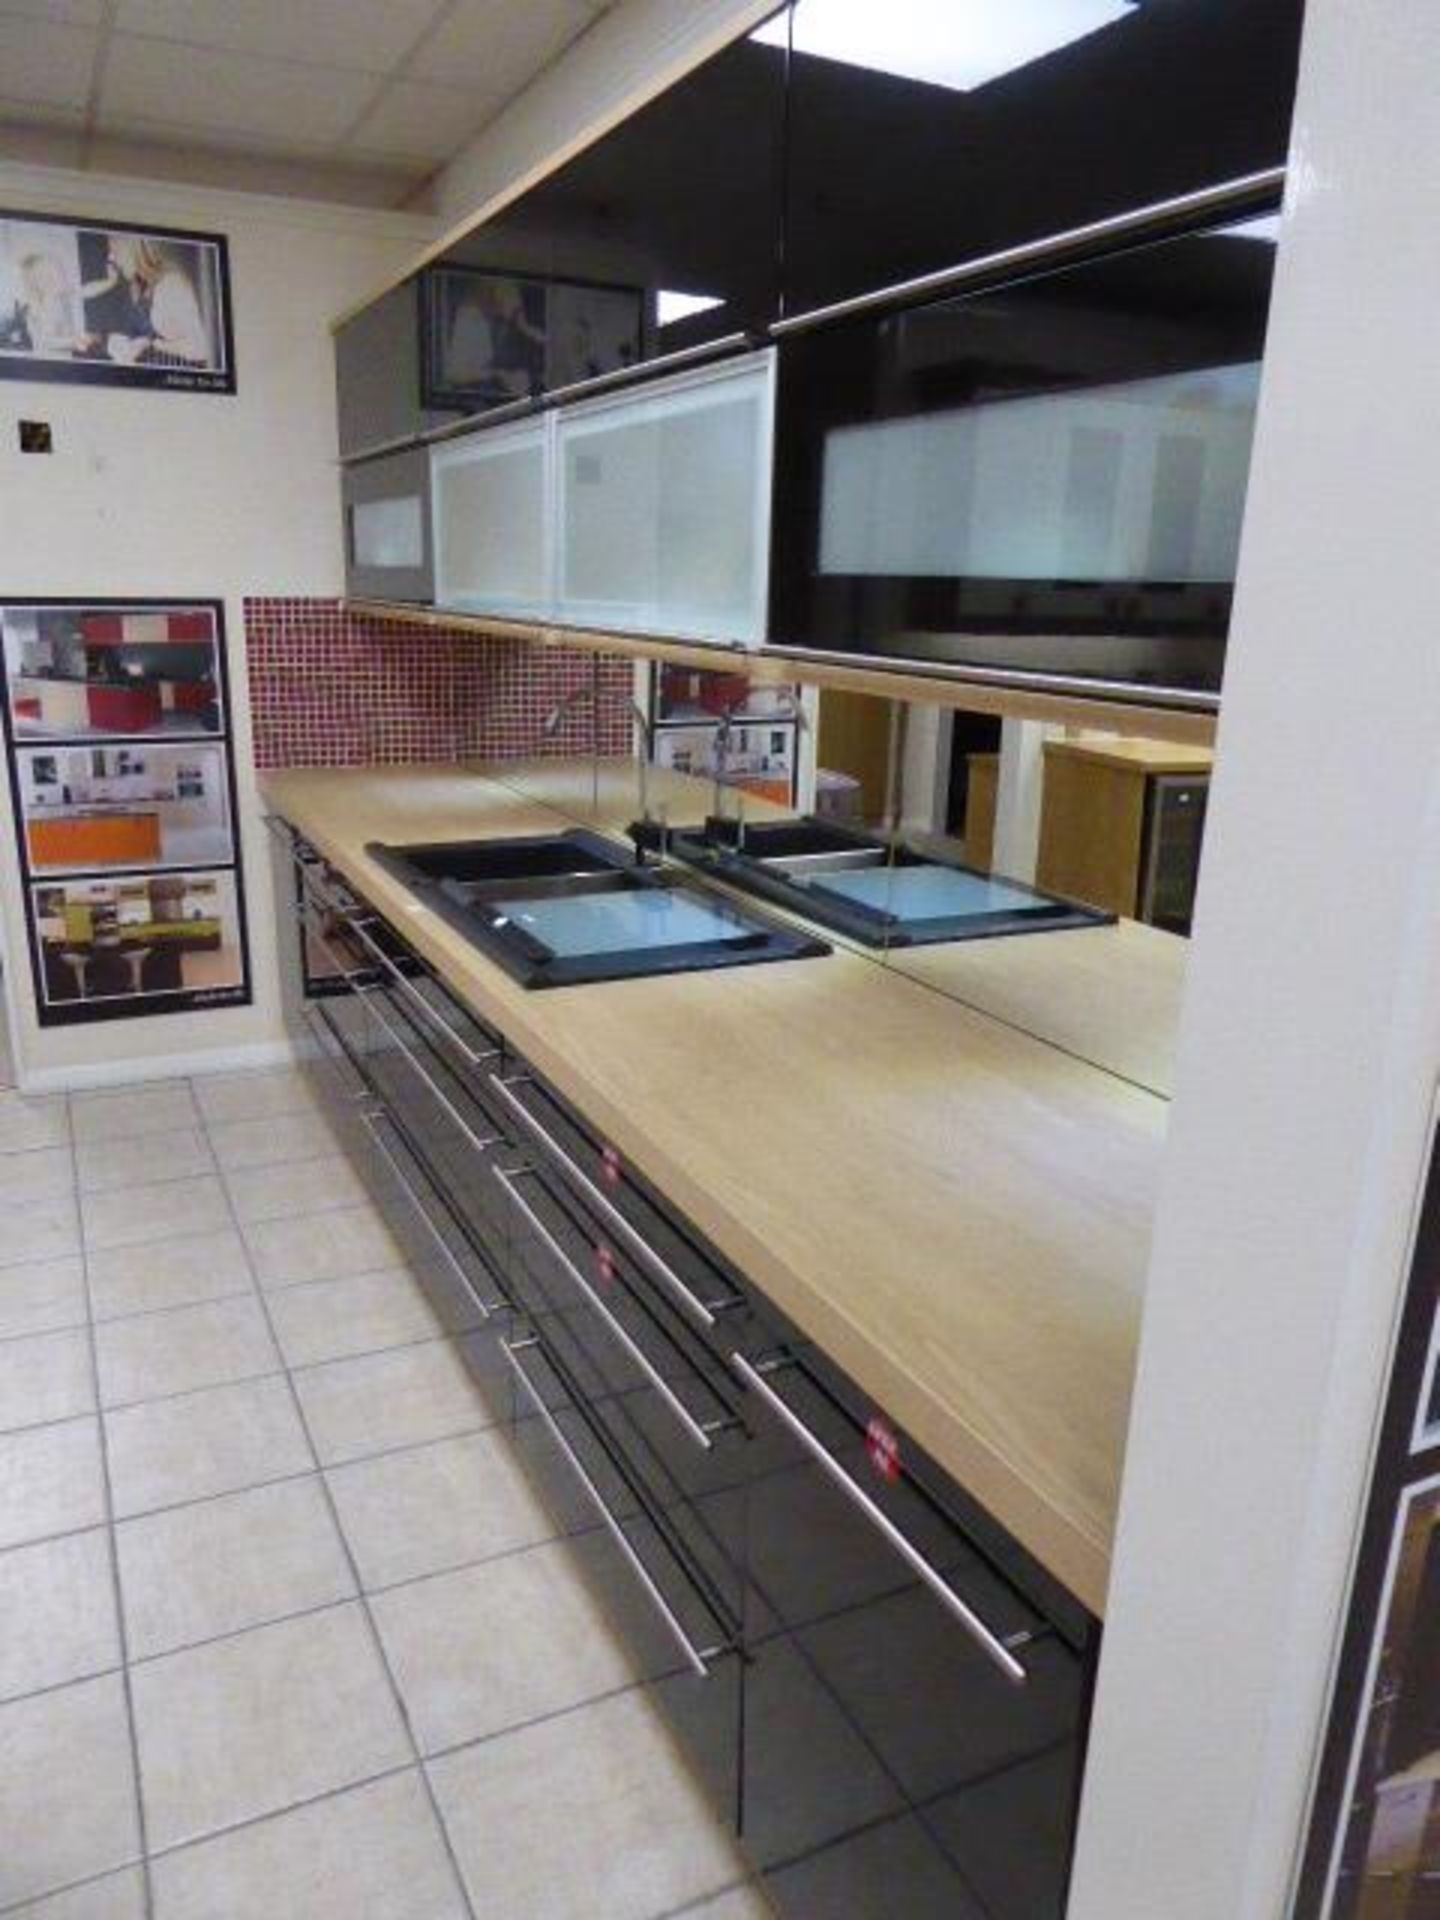 Alto gloss black galley kitchen measuring 370cm long with light oak wood laminate worktops. With a 1 - Image 3 of 12